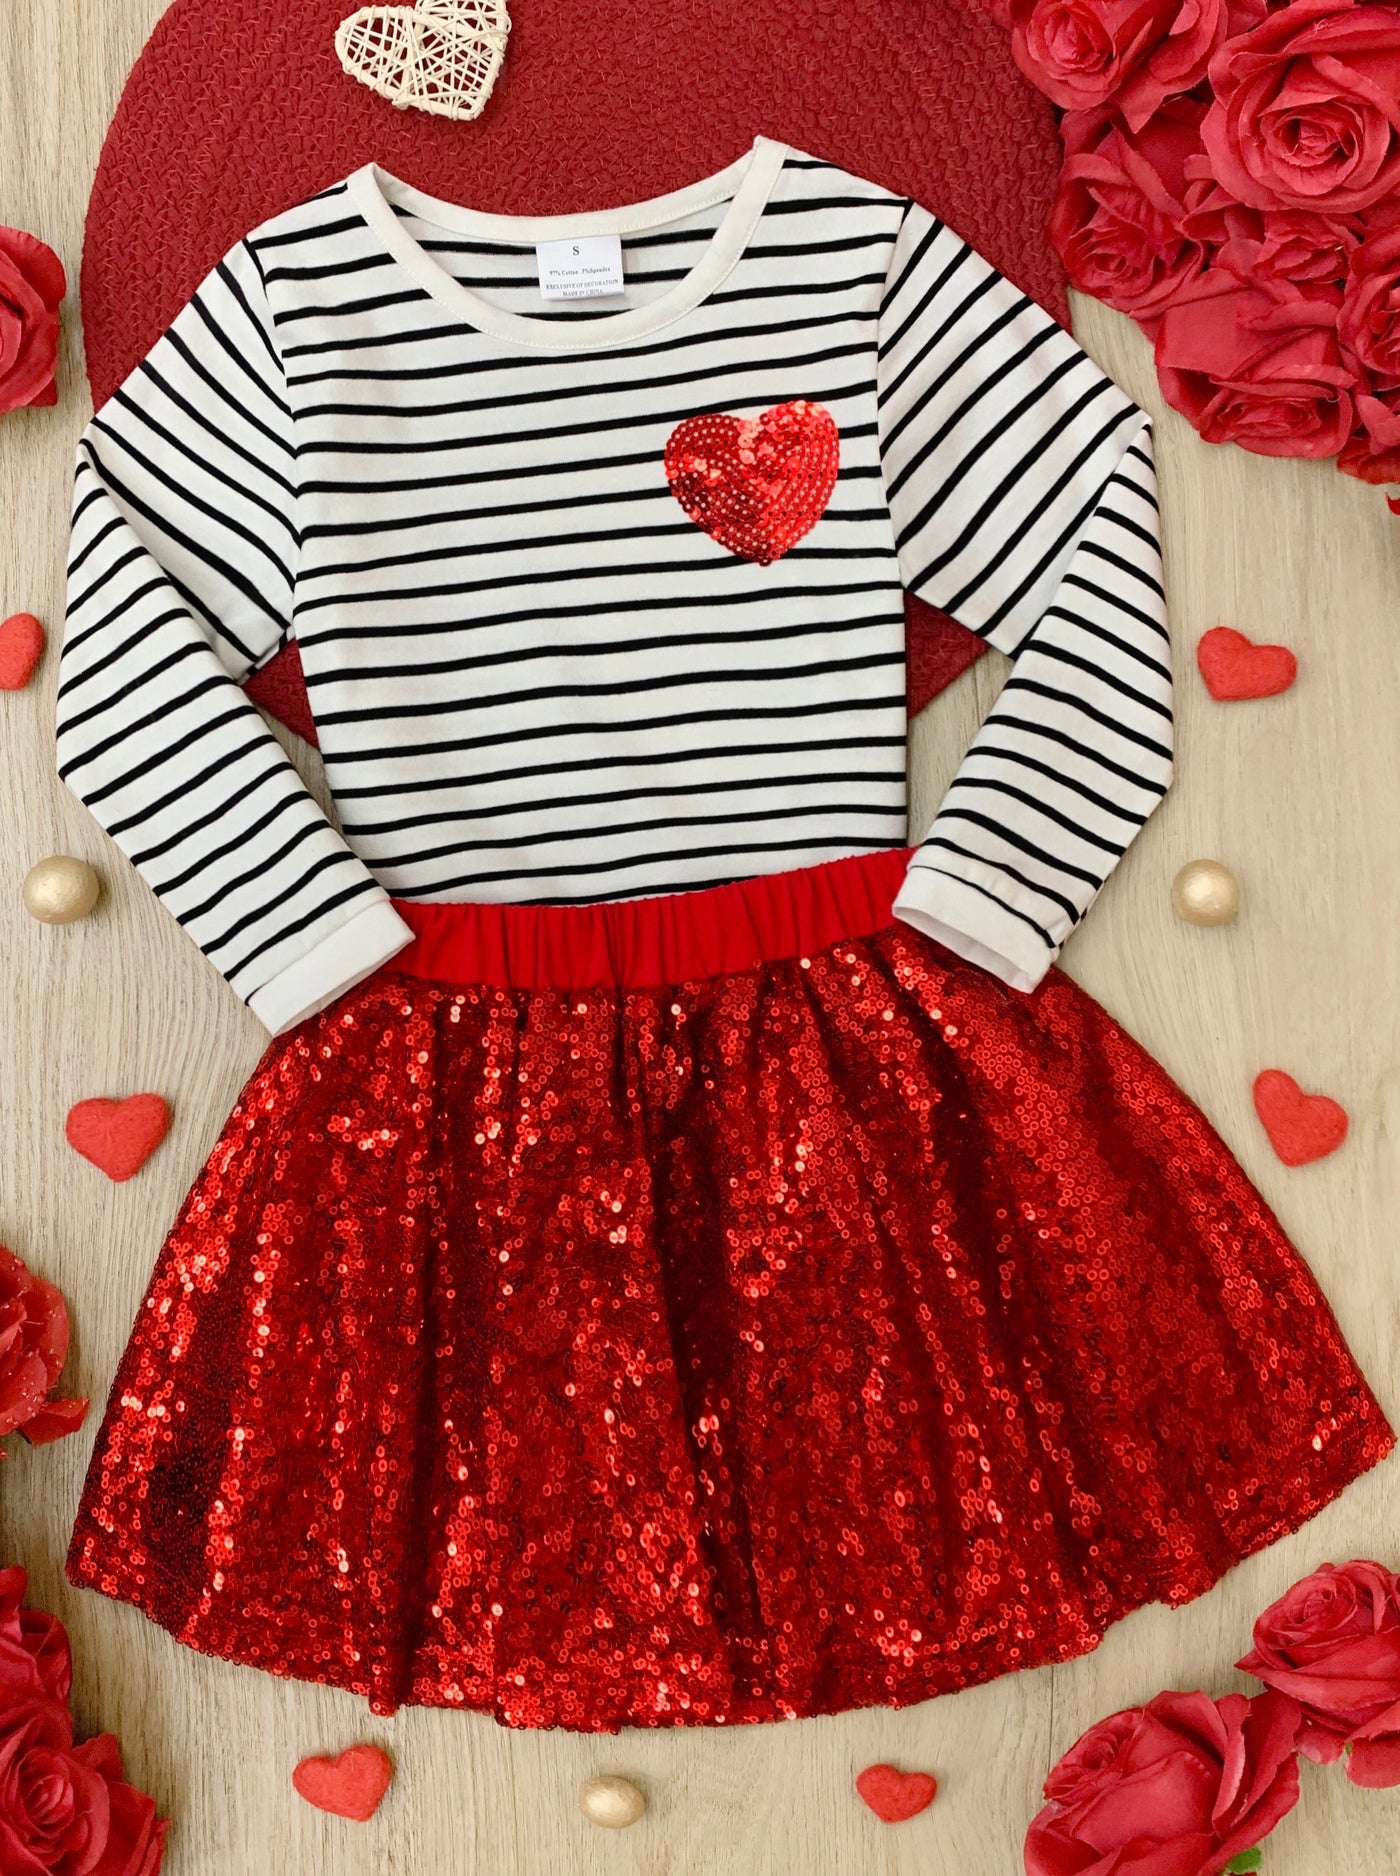 Toddler Valentine's Outfits | Girls Striped Top and Sequin Skirt Set